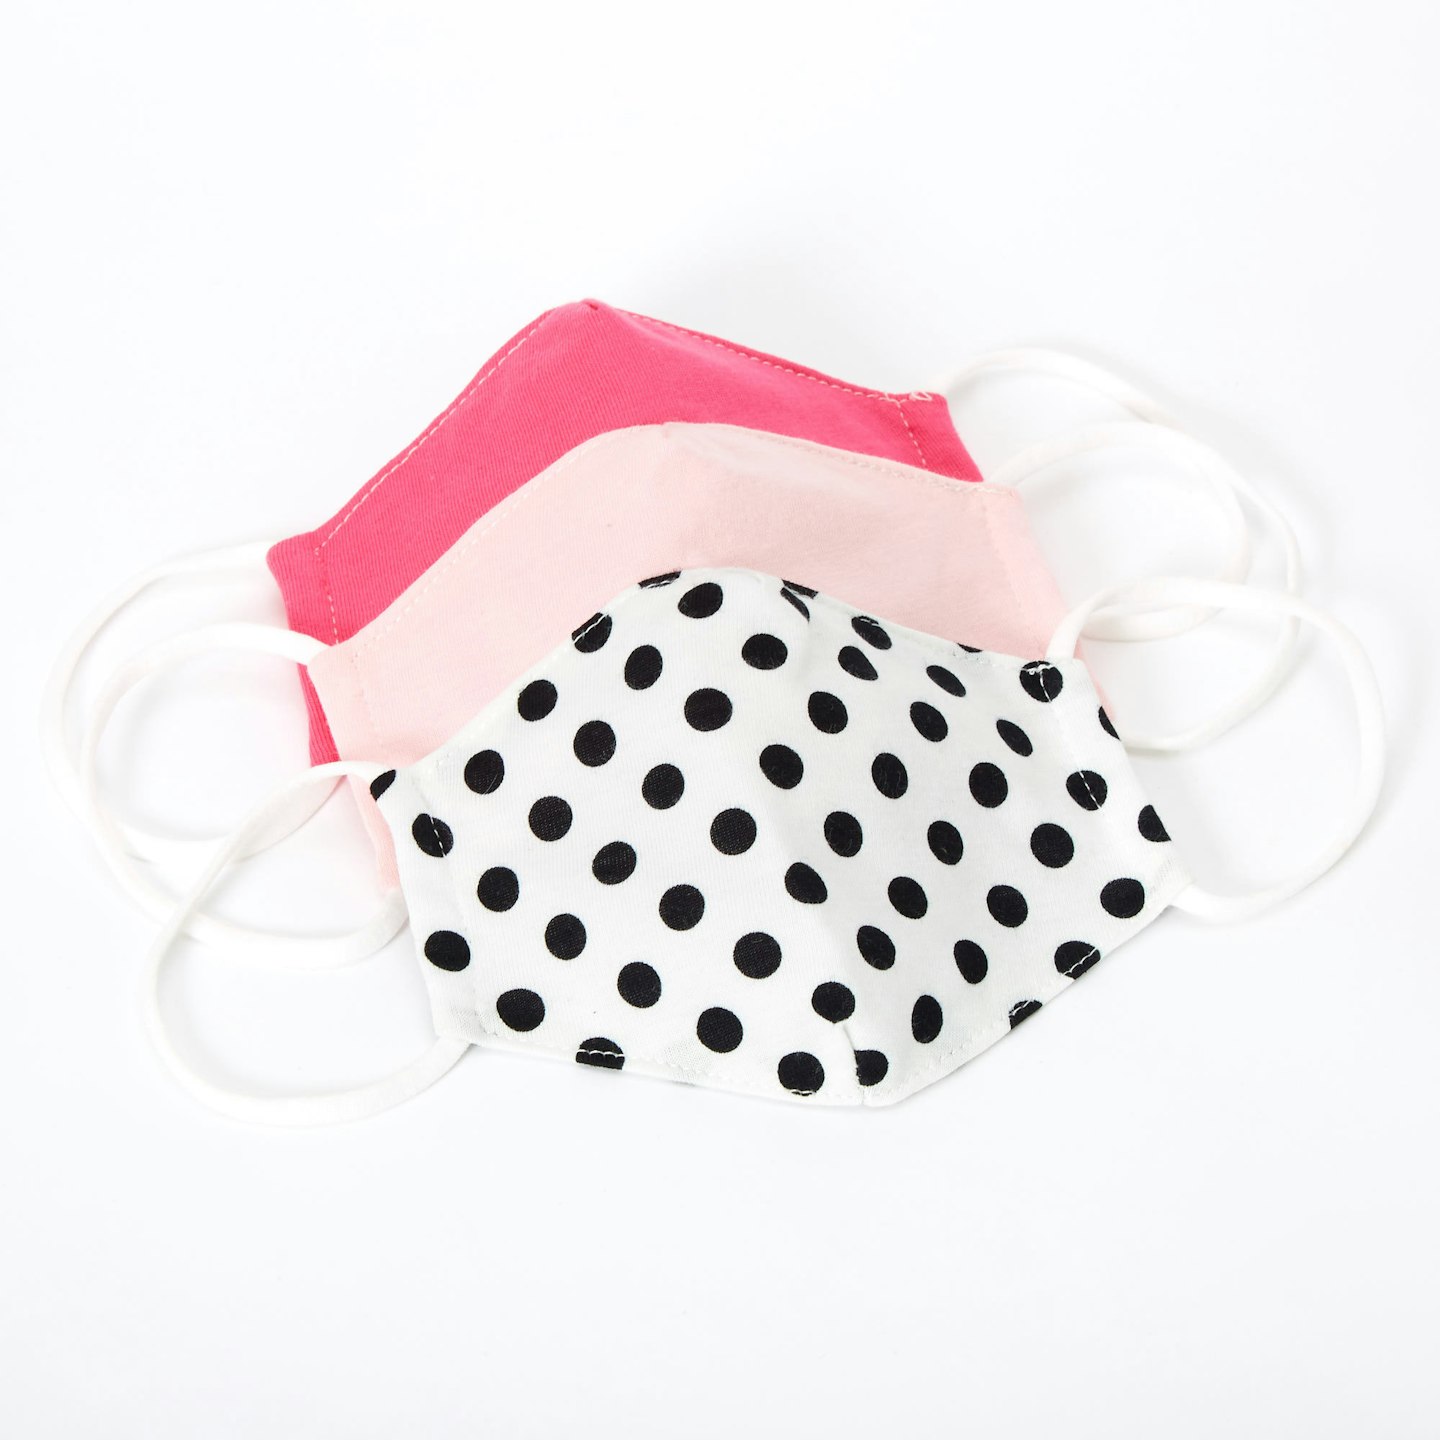 Claire's, 3 Pack Cotton White and Pink Polka Dot Face Masks, £20